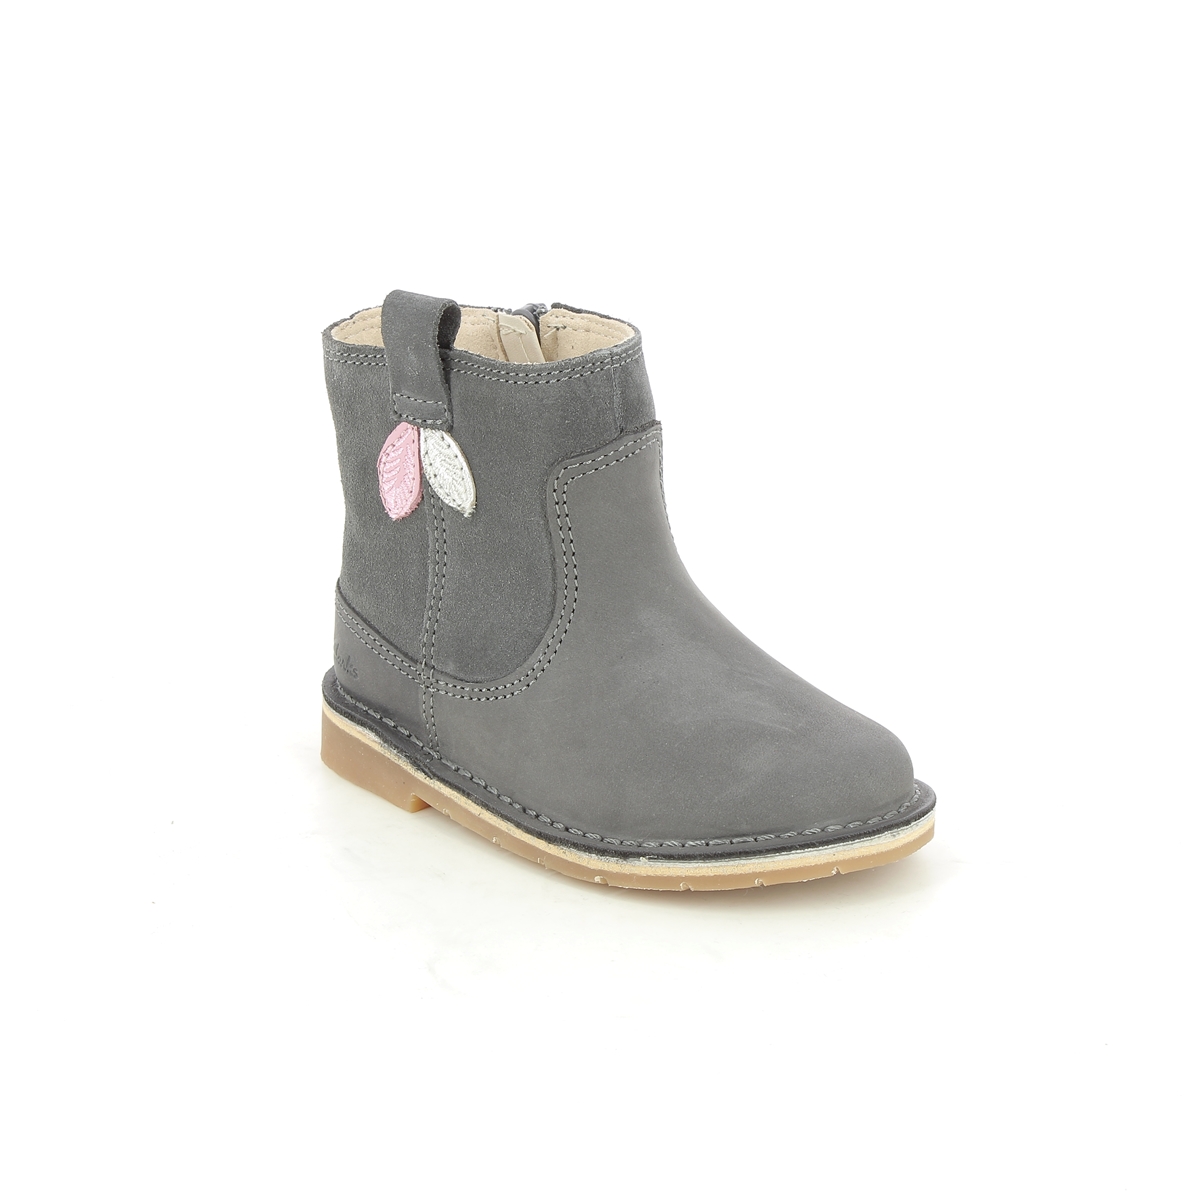 Clarks Comet Style T Grey Leather Kids Toddler Girls Boots 619426F In Size 8 In Plain Grey Leather F Width Fitting Regular Fit For kids